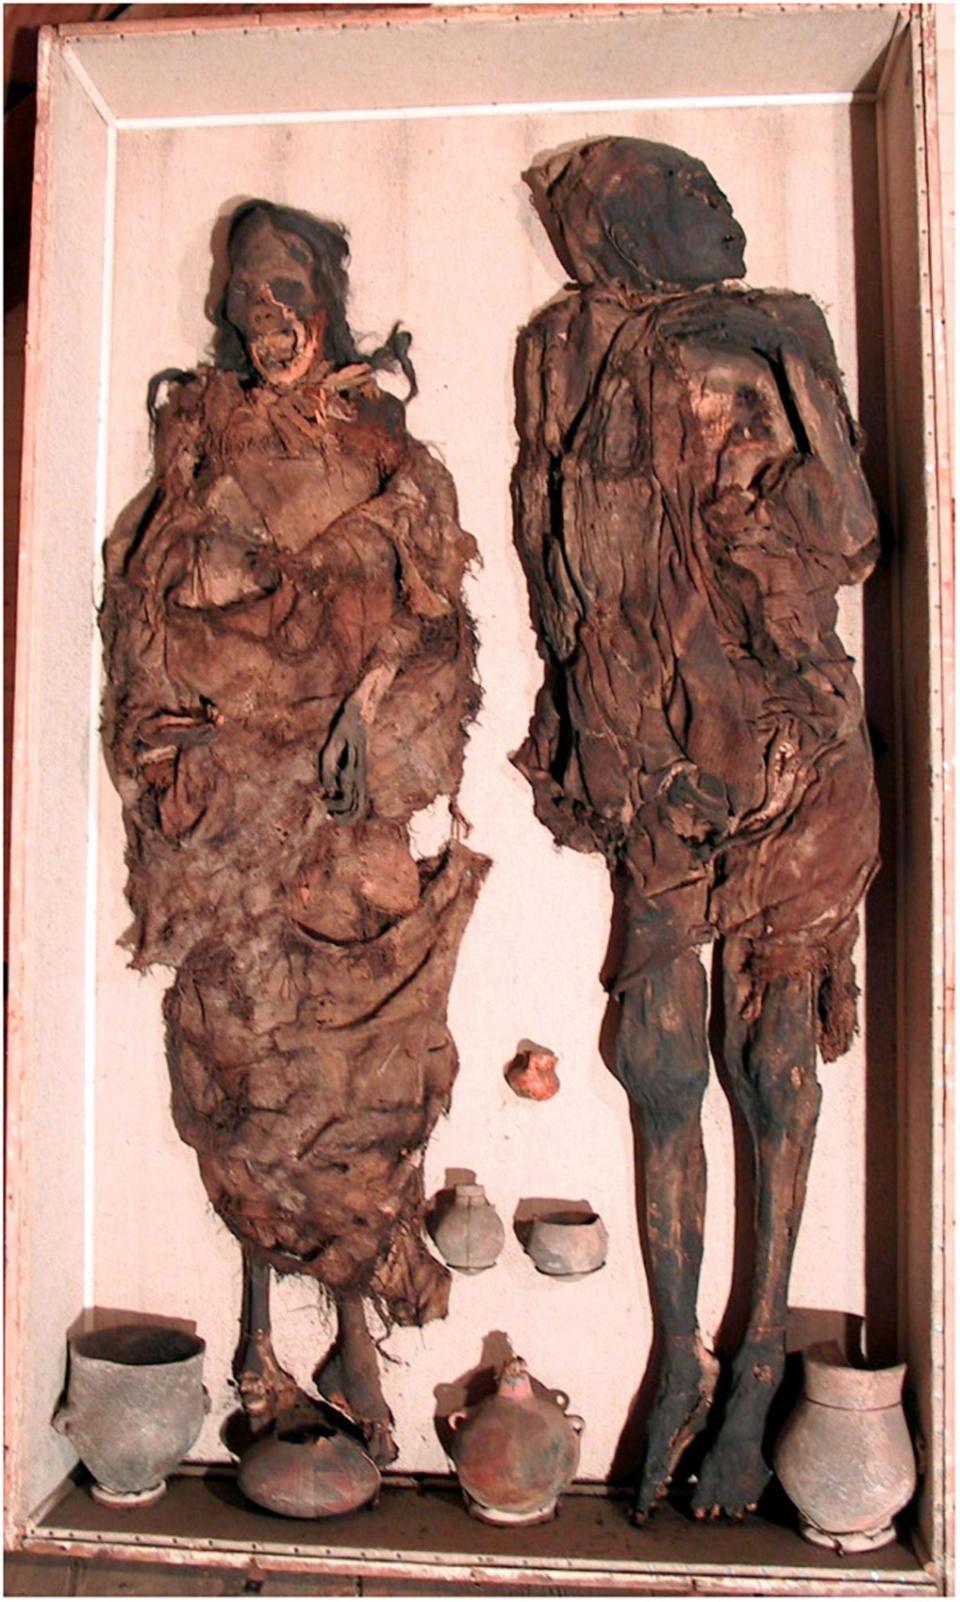 The “Delémont man” (right) and the “Delémont woman” (left)—“overview of the two mummies in their repository case.”